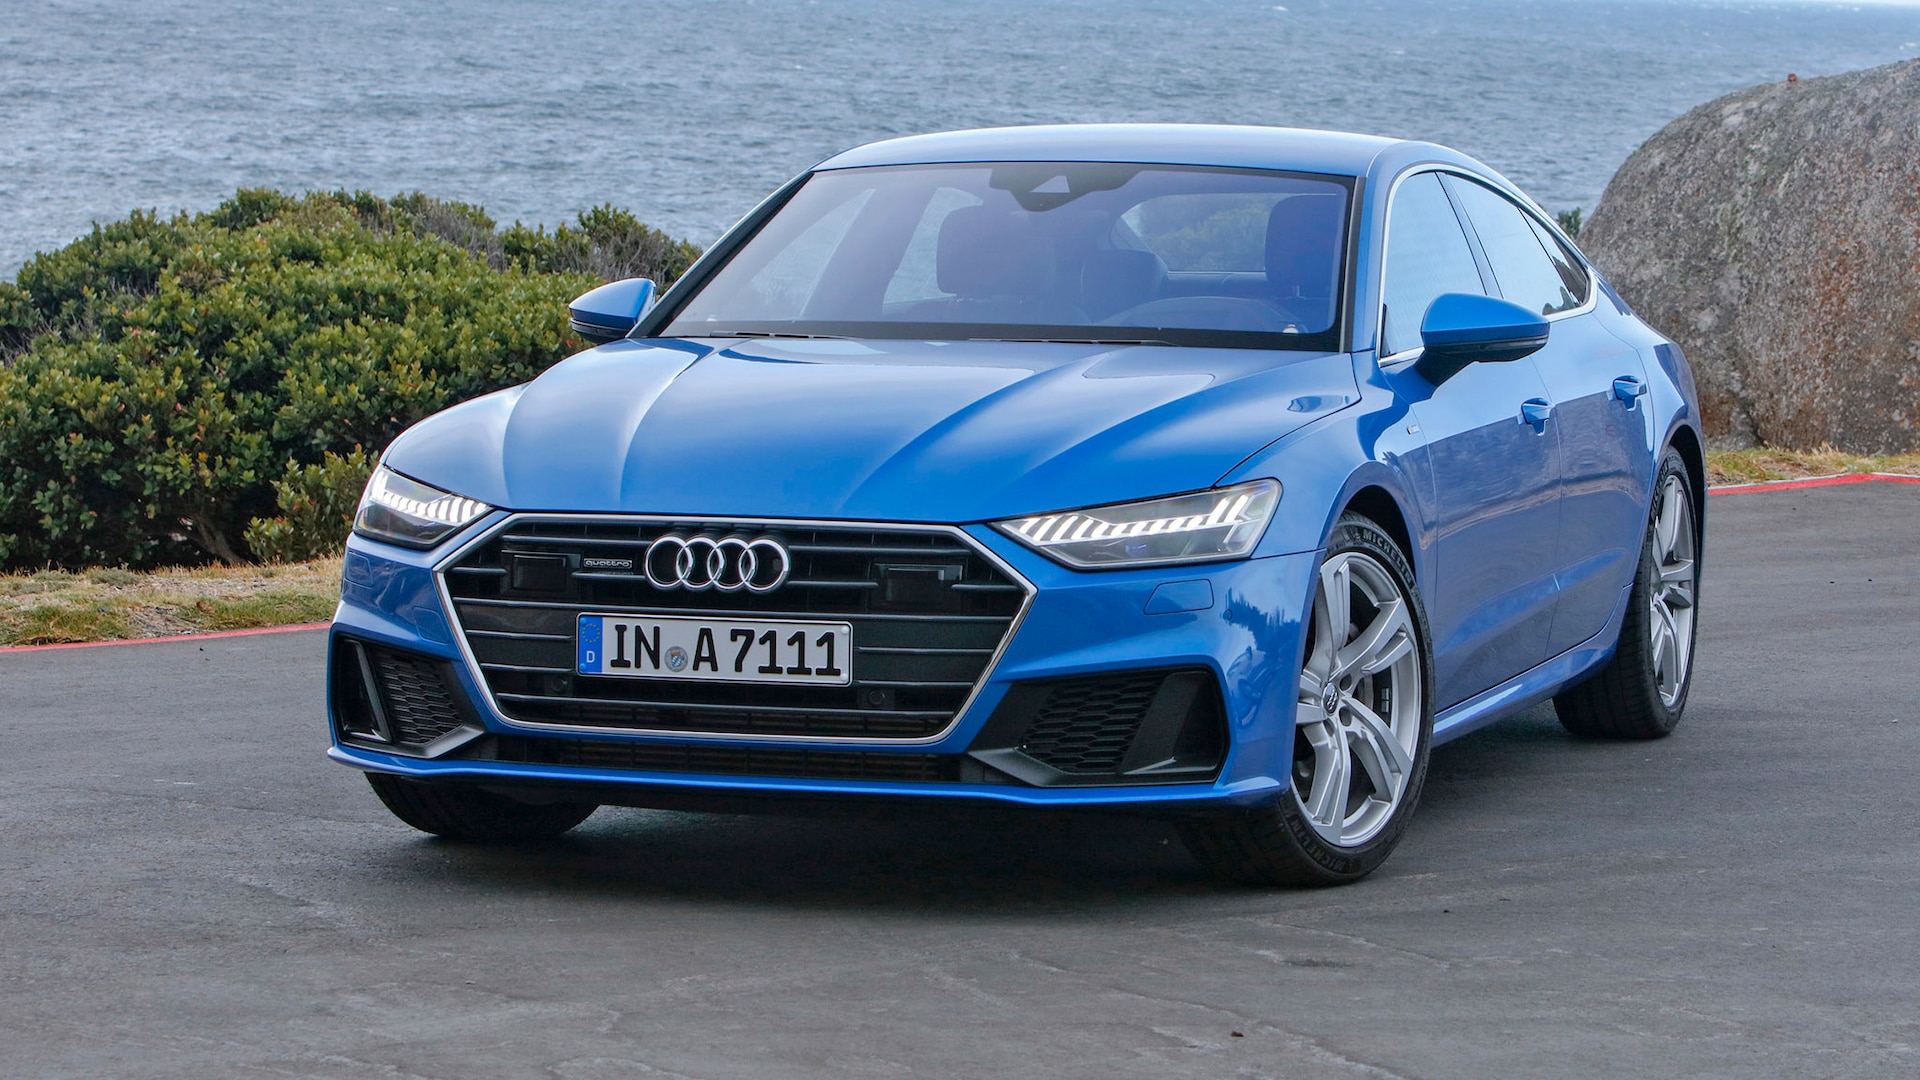 2023 Audi A7 Prices, Reviews, and Photos - MotorTrend